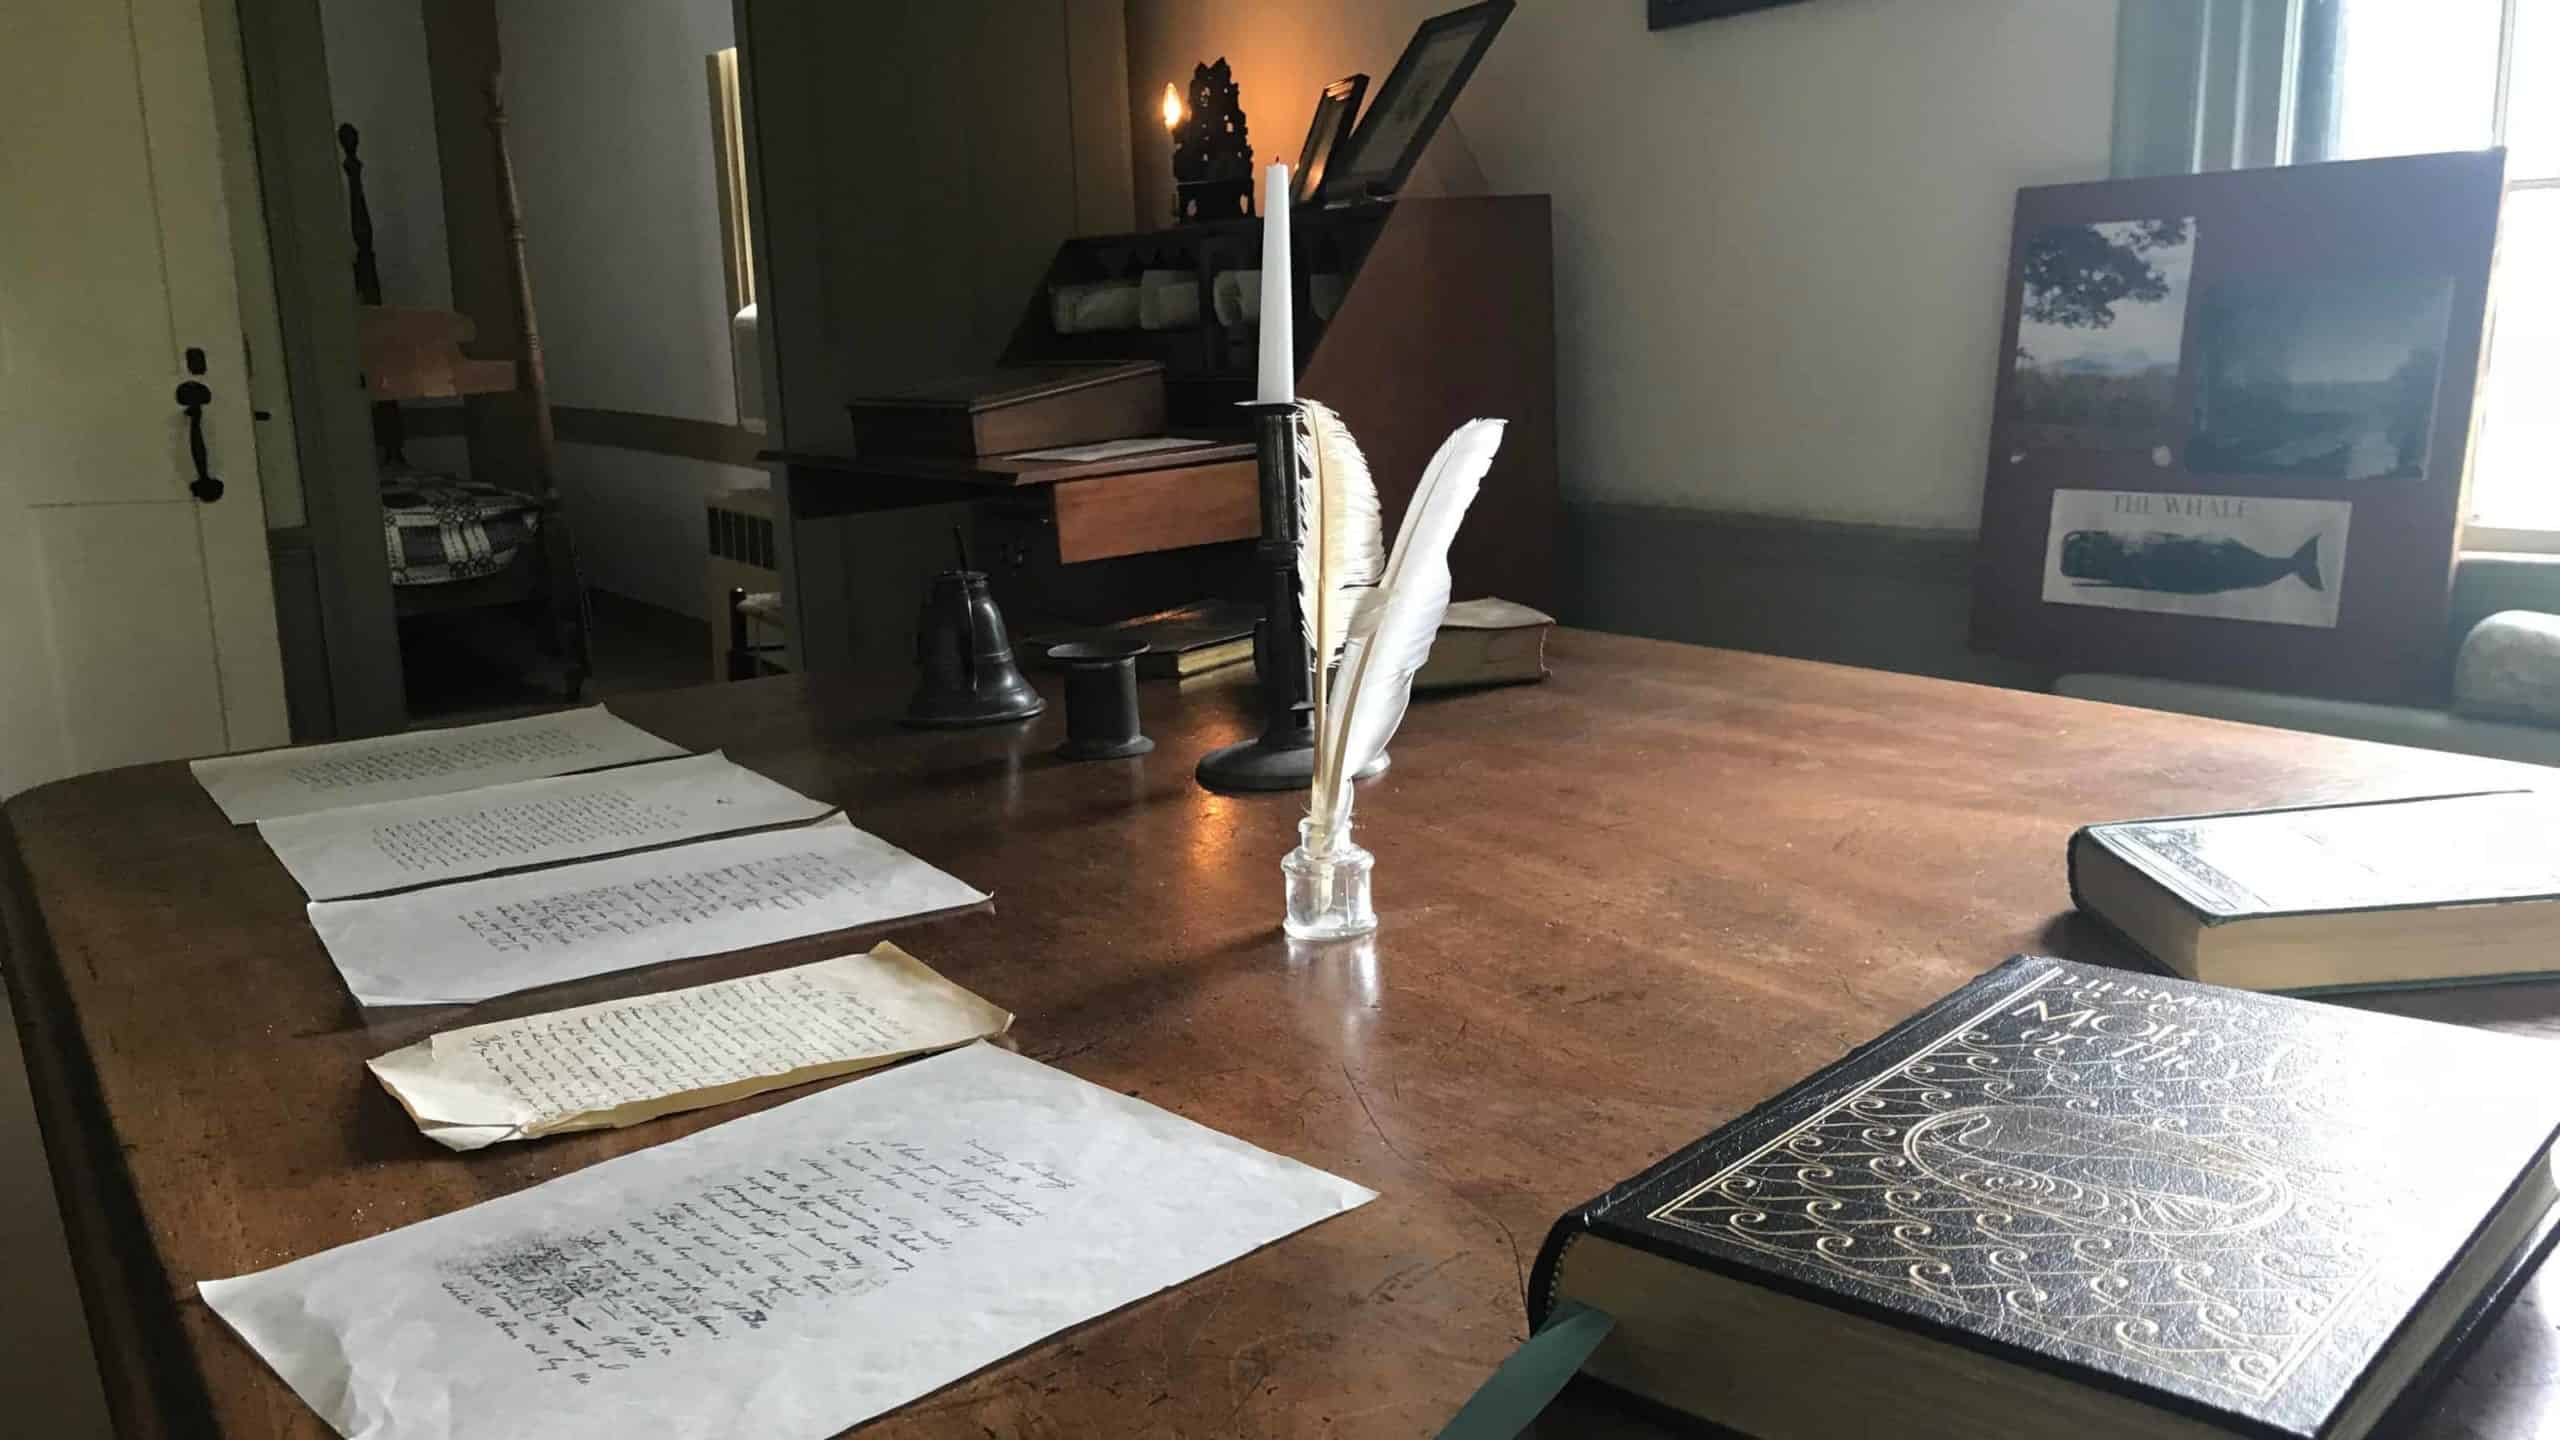 Herman Melville wrote Moby-Dick at his desk at Arrowhead in Pittsfield.